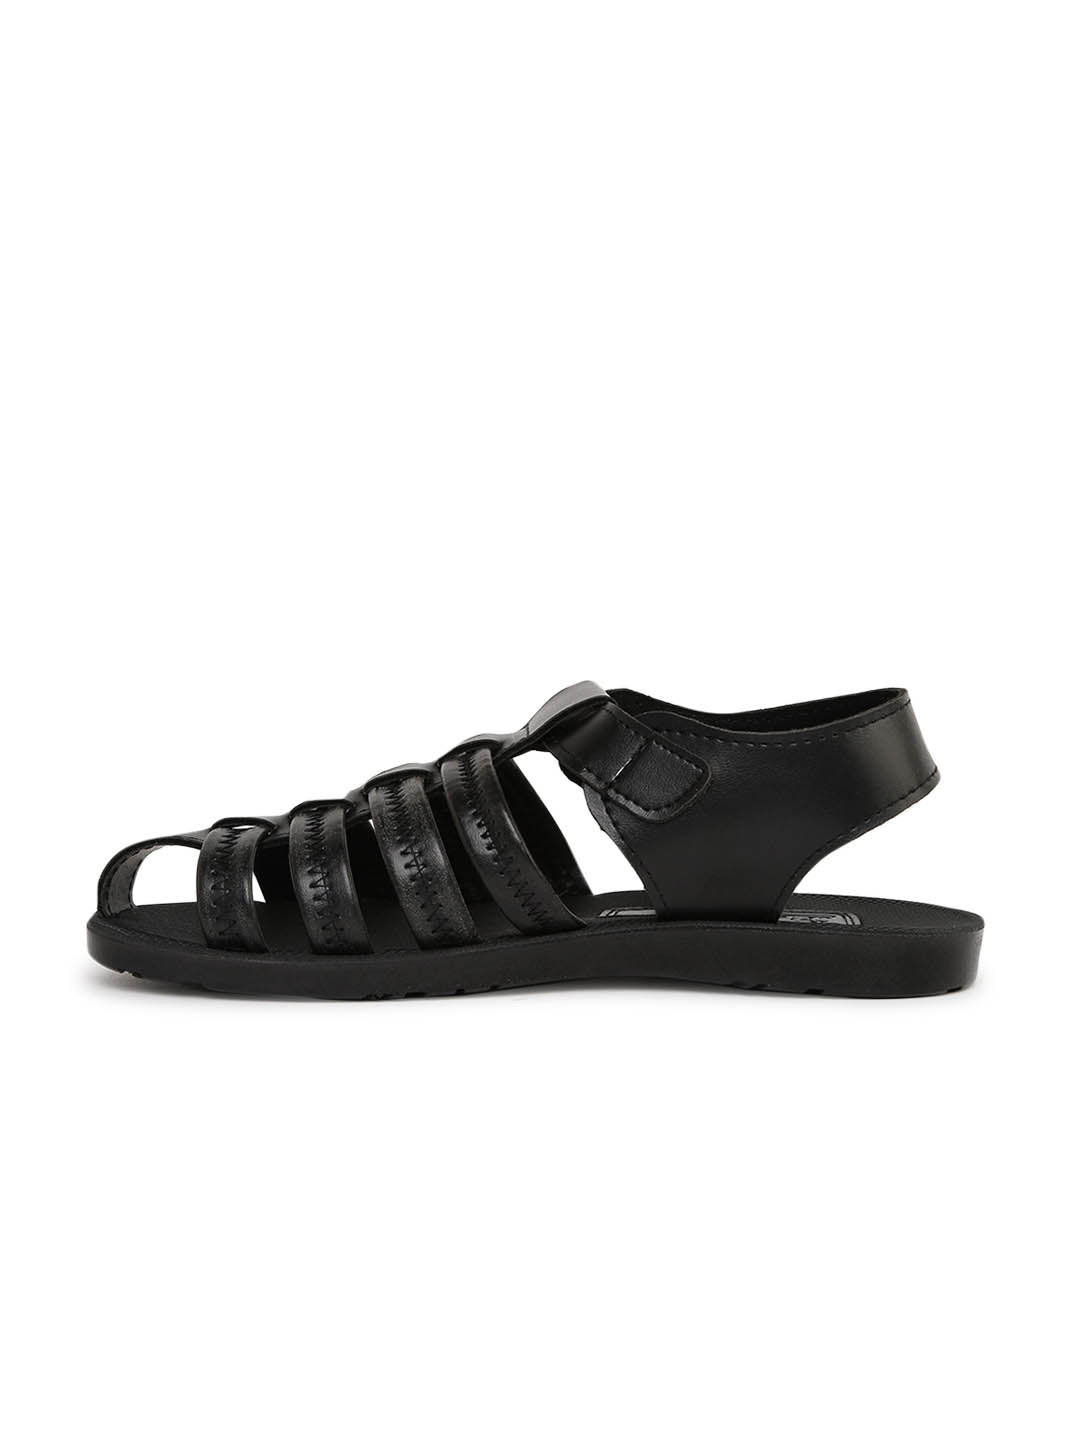 Paragon PU8985G Men Stylish Sandals | Comfortable Sandals for Daily Ou ...